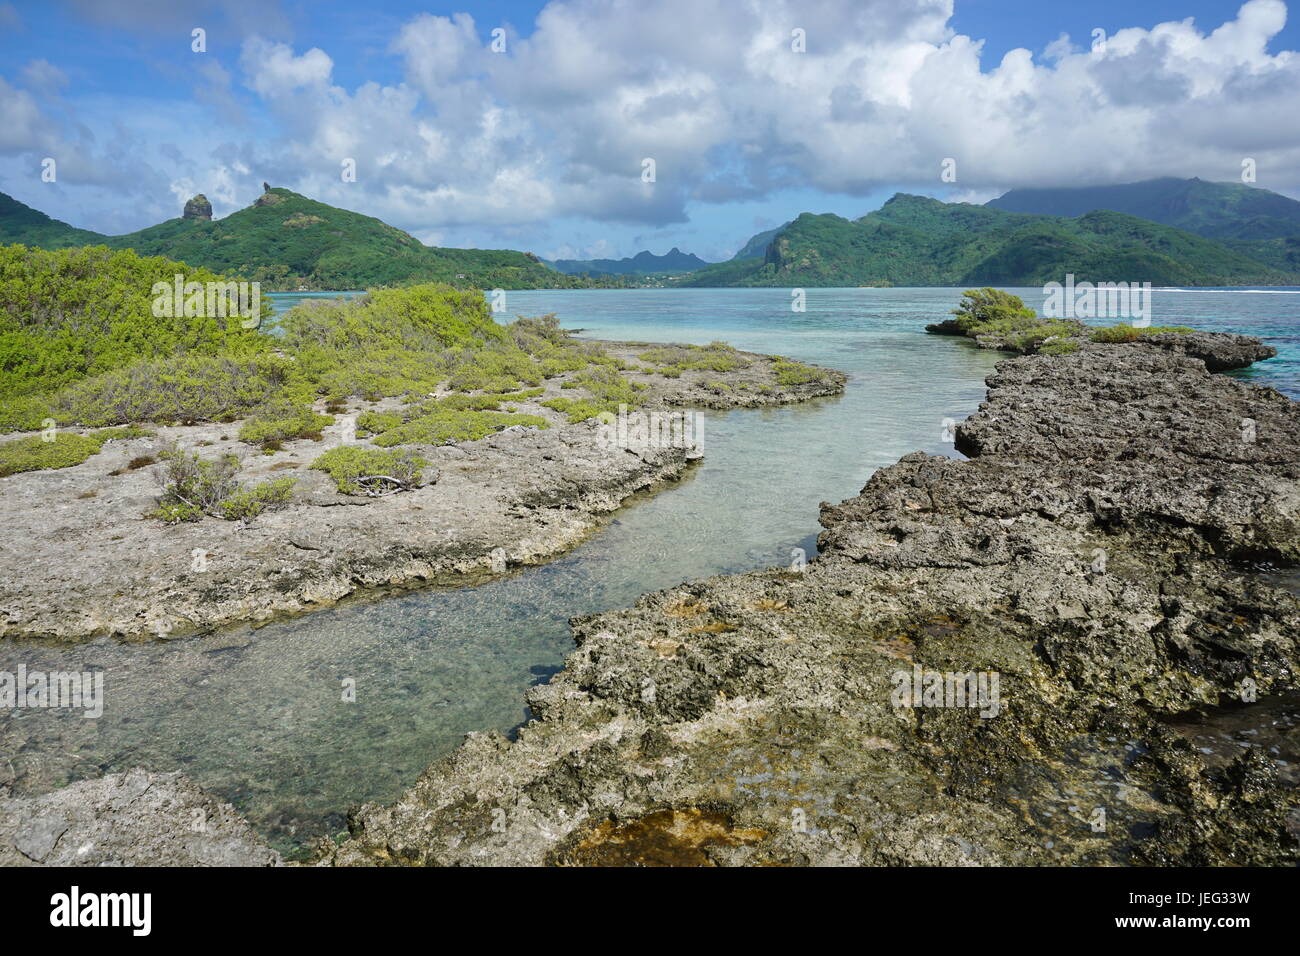 South pacific island seen from a rocky islet in the lagoon, Huahine in French Polynesia, Leeward islands Stock Photo